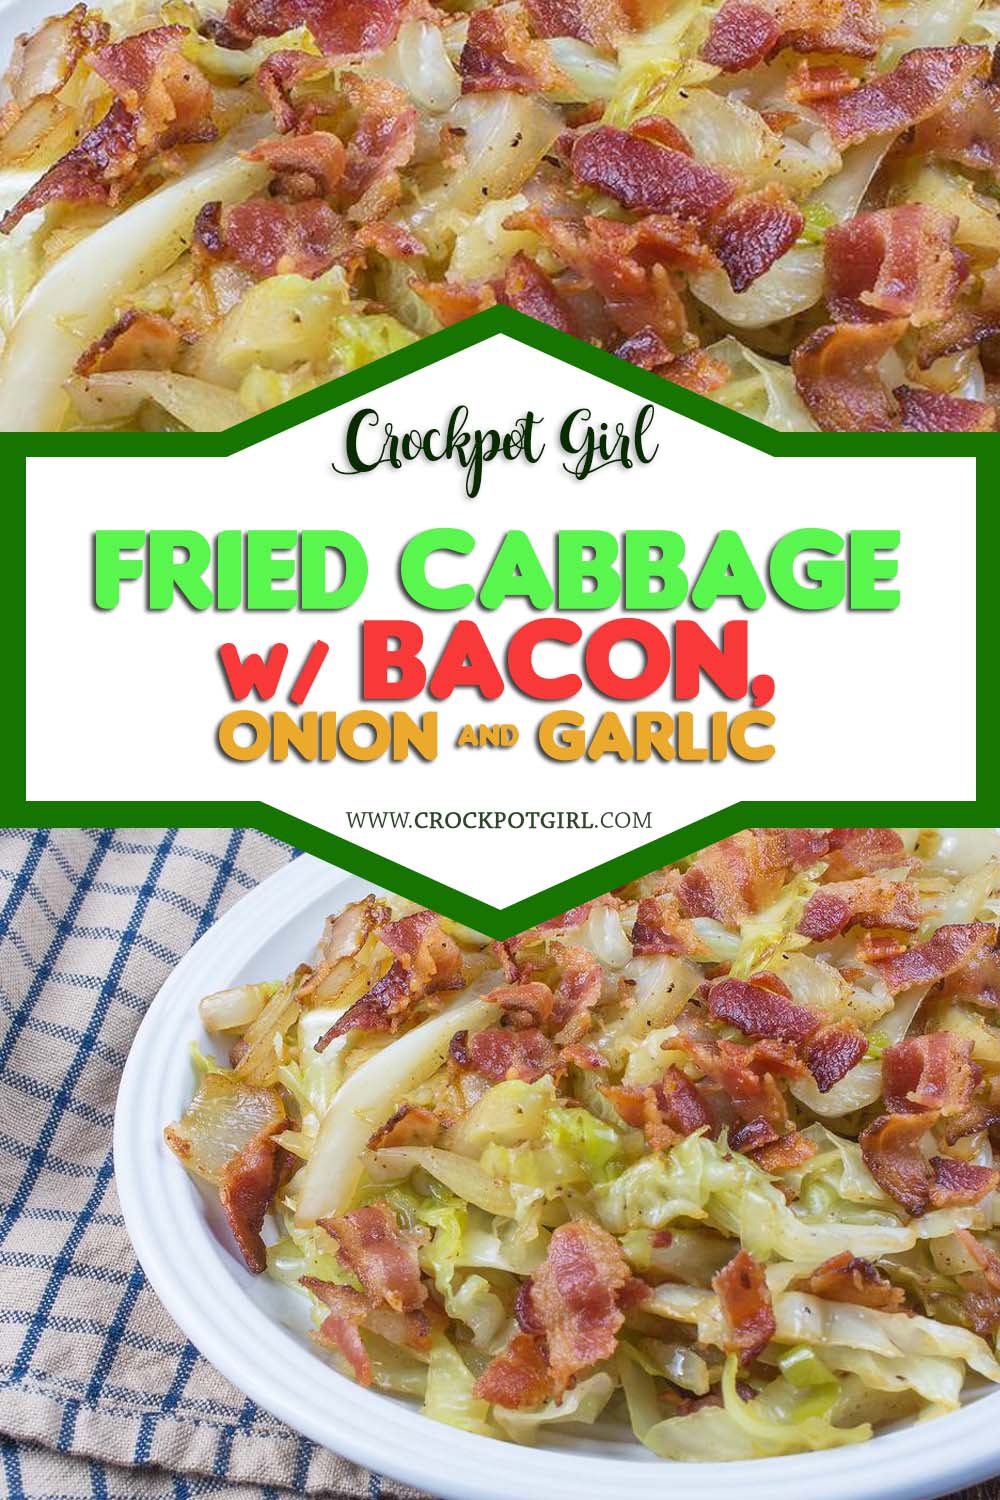 Fried Cabbage with Bacon, Onion, and Garlic Recipe